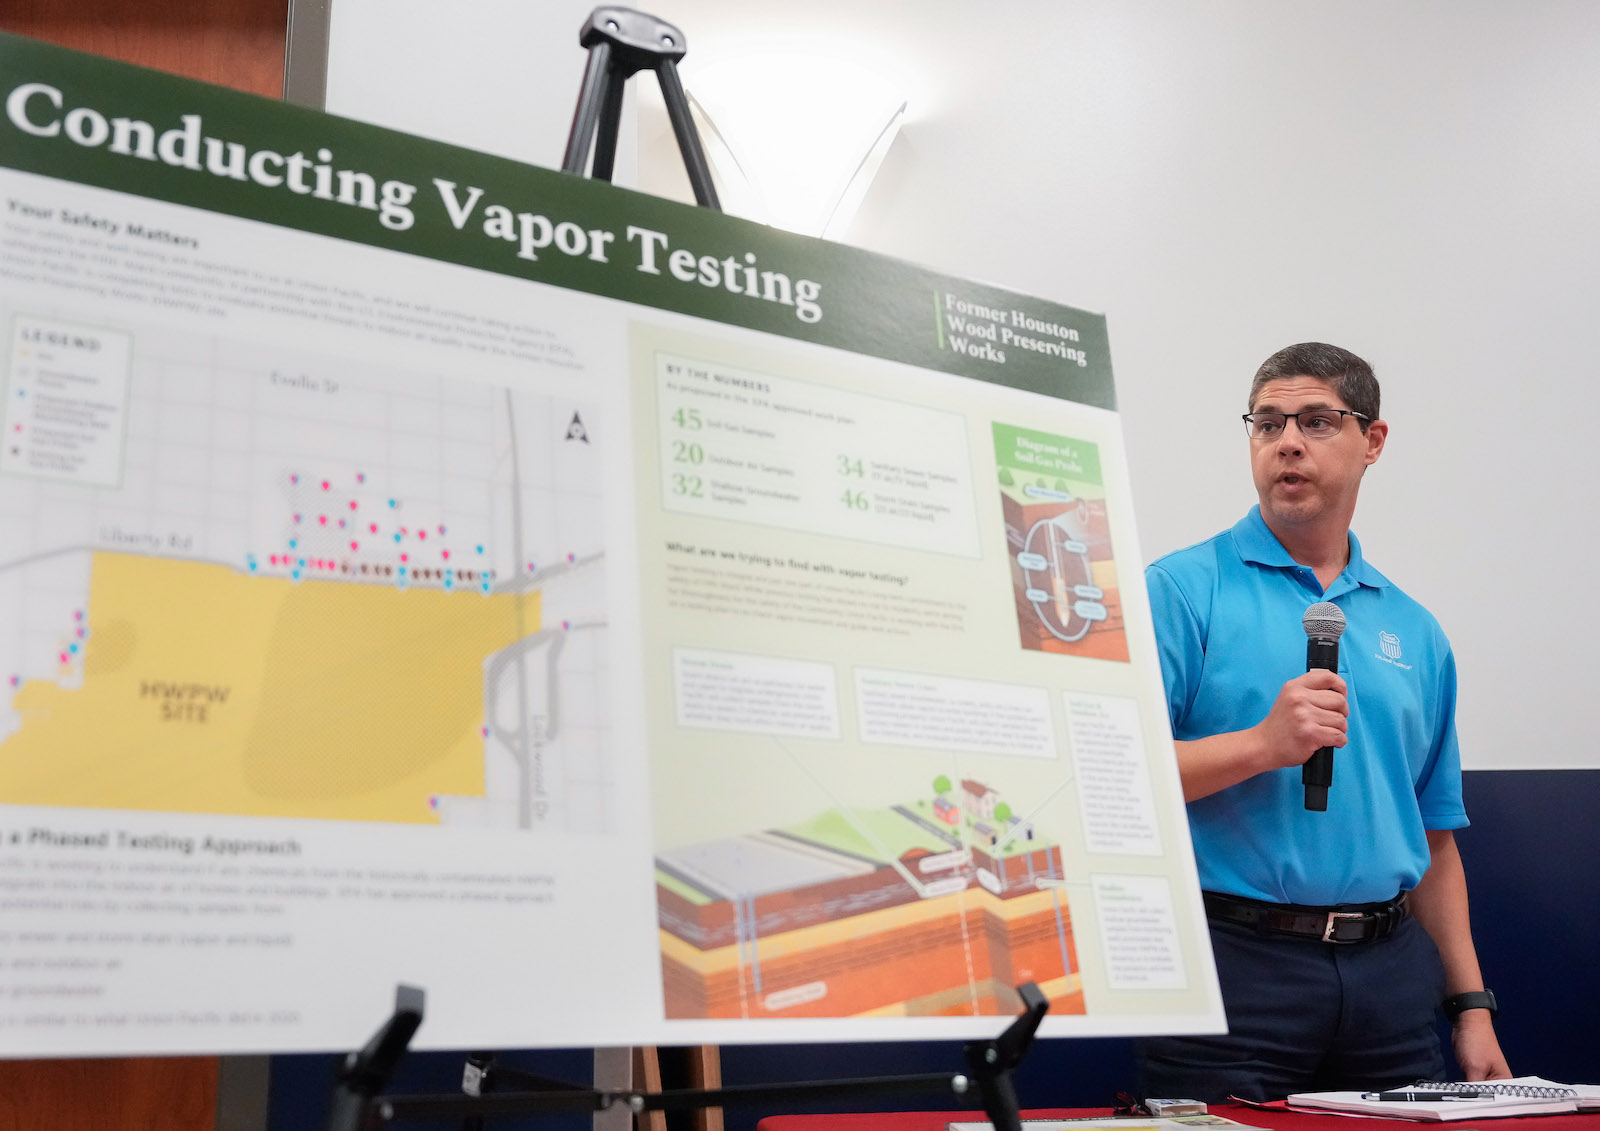 a person with a microphone talks behind a vapor testing presentation board